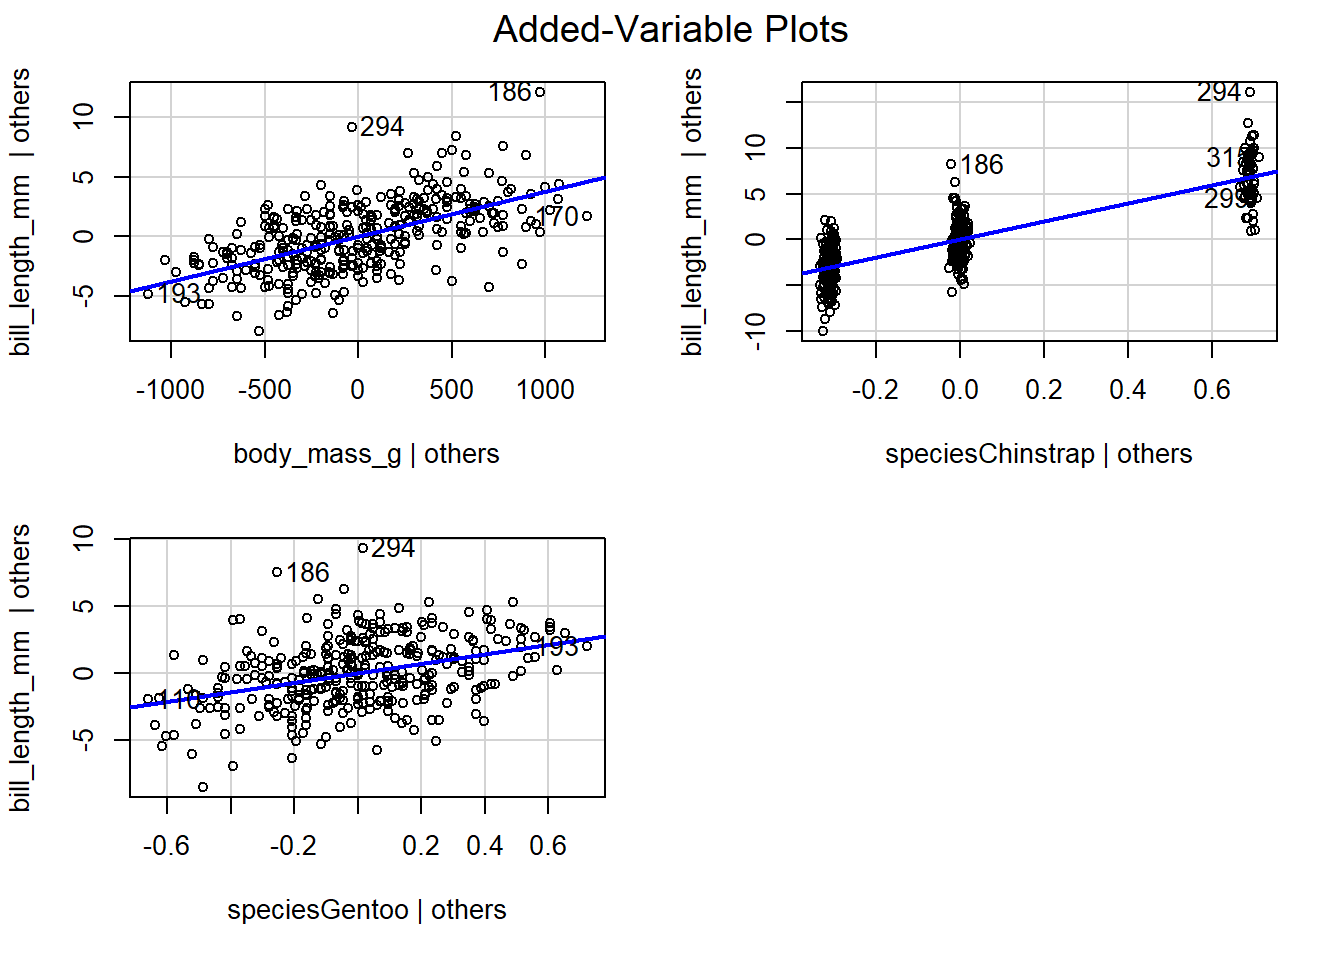 The added-variable plots for all regressors in the parallel lines model fit to the `penguins` data.